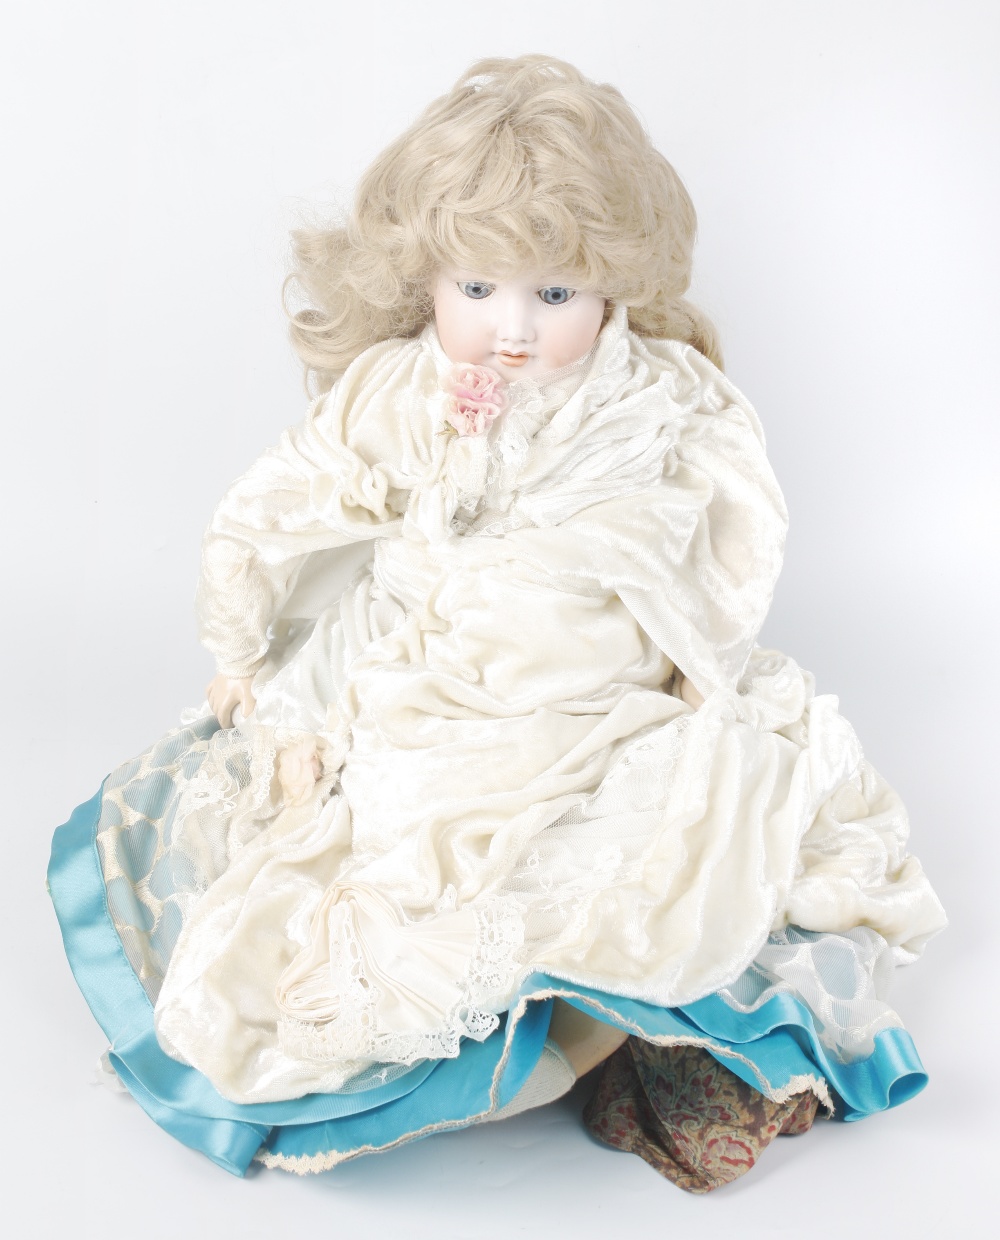 An Armand Marseille bisque headed doll, modelled as a young girl with blonde hair, opening blue